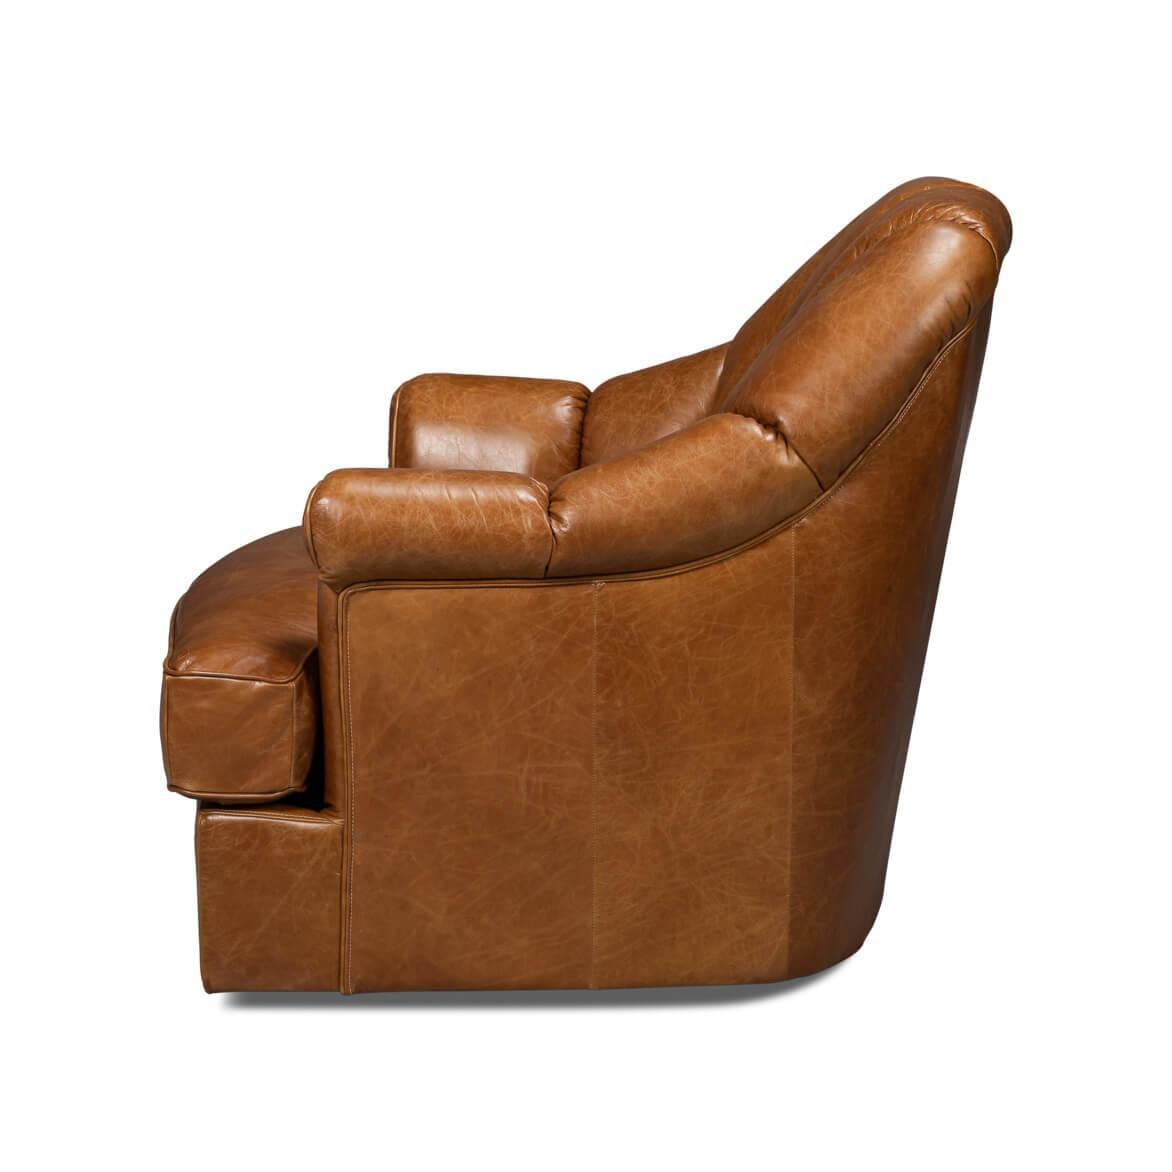 American Classical Medium Brown Leather Swivel Chair For Sale